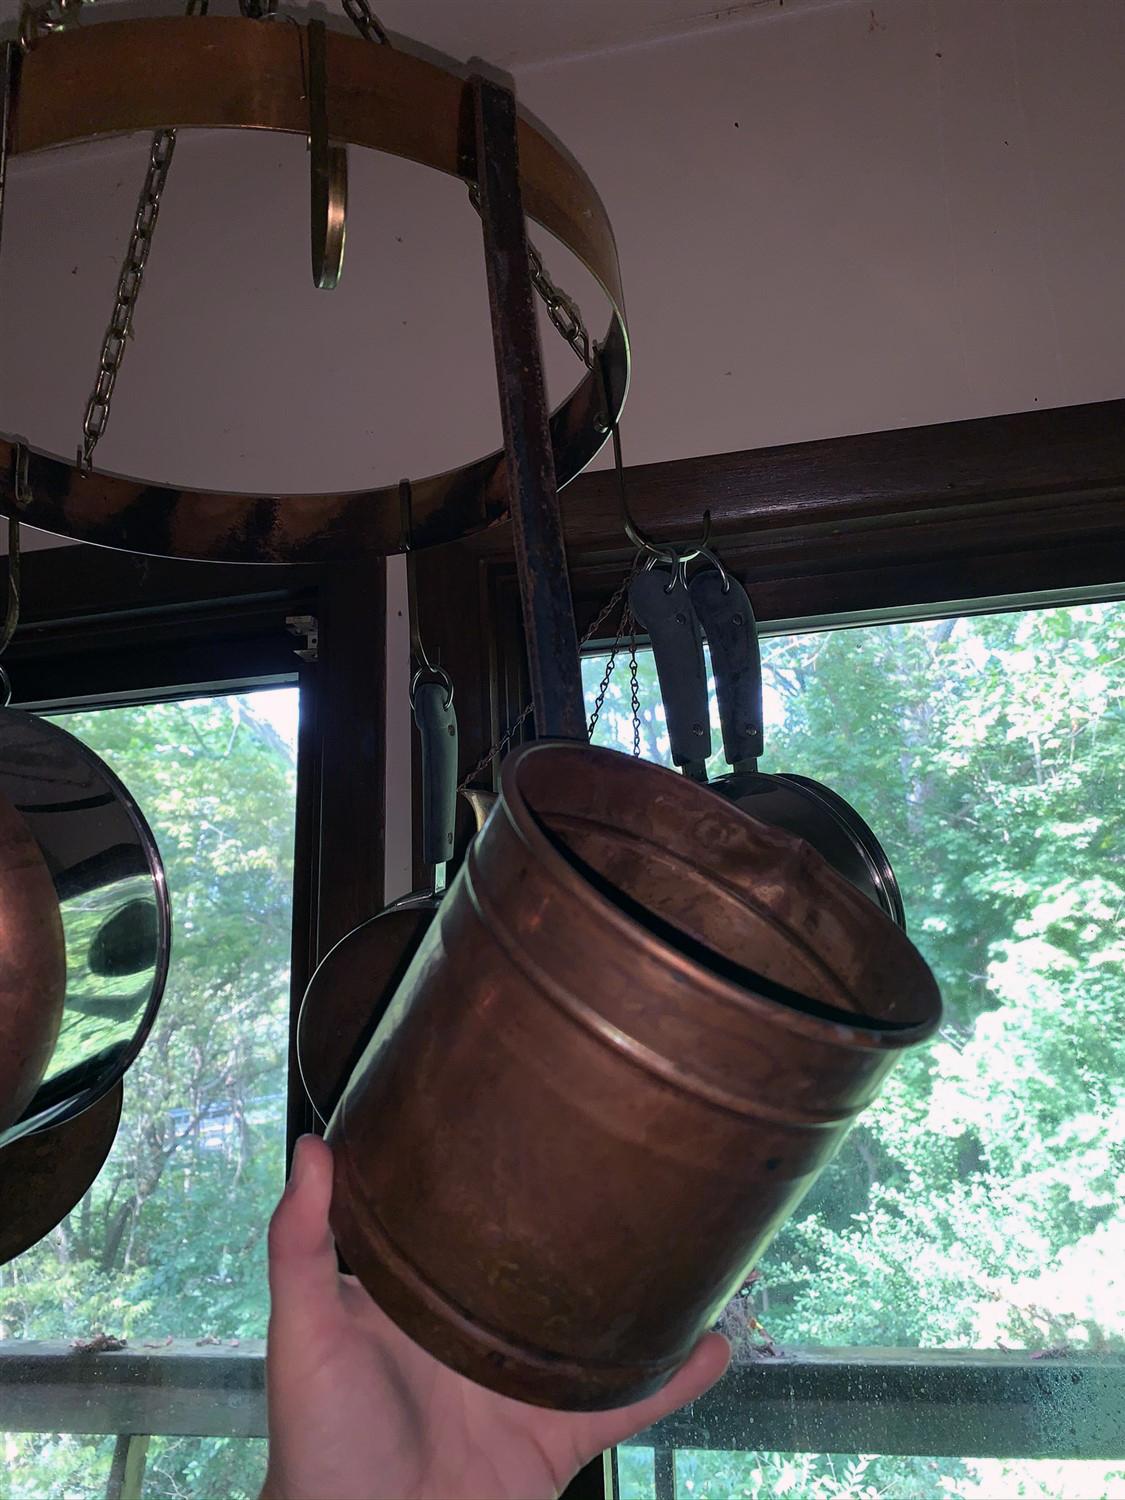 Revere Ware Copper Bottom Pots and Copper Hanging Pot Rack 16" Circumference